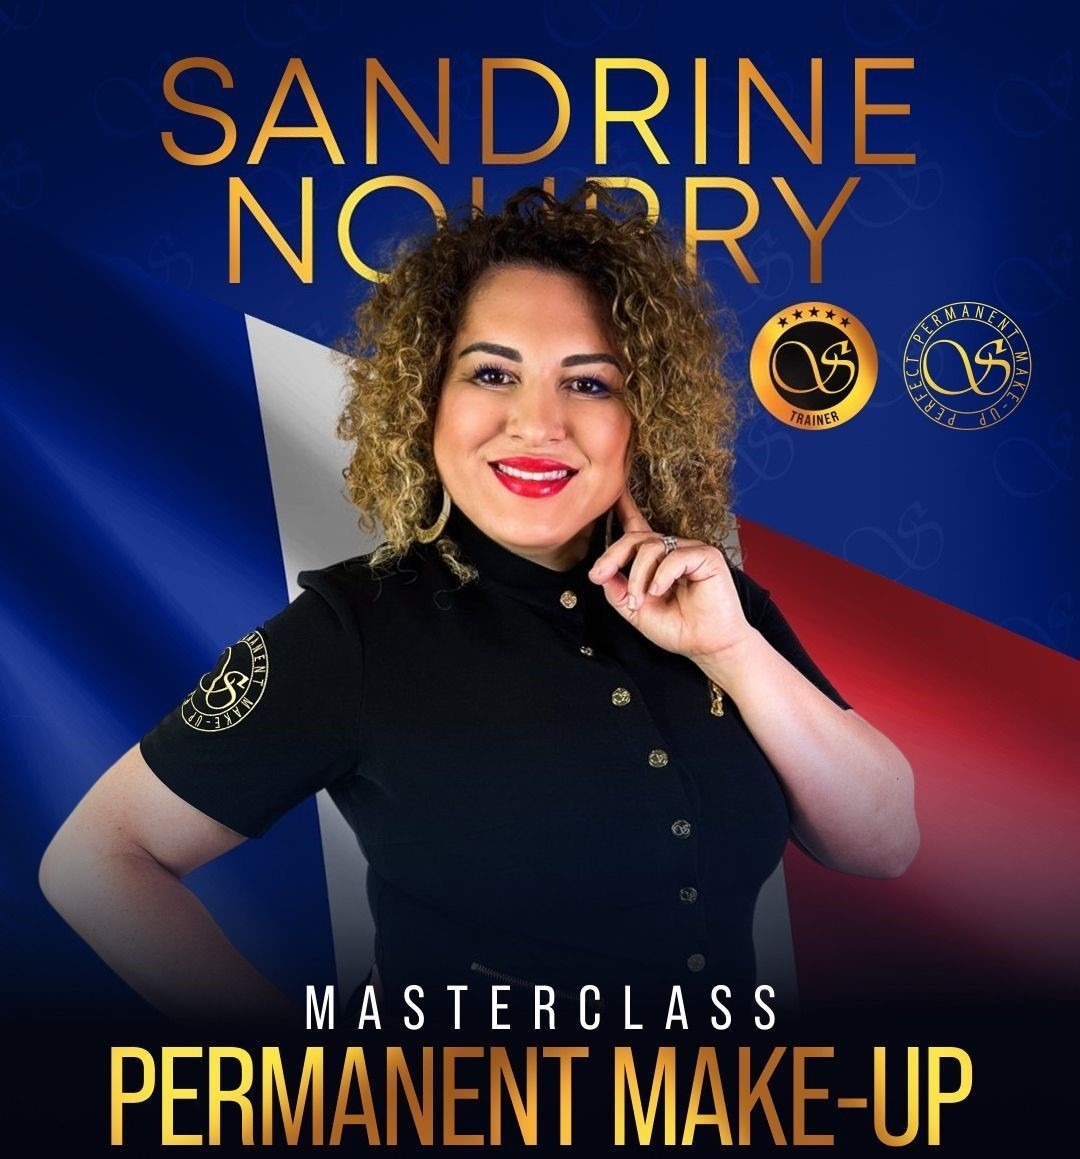 Formation Masterclass Maquillage permanent à Montpellier aout 2023 - Sandrine Nourry Sviatoacademy Trainer